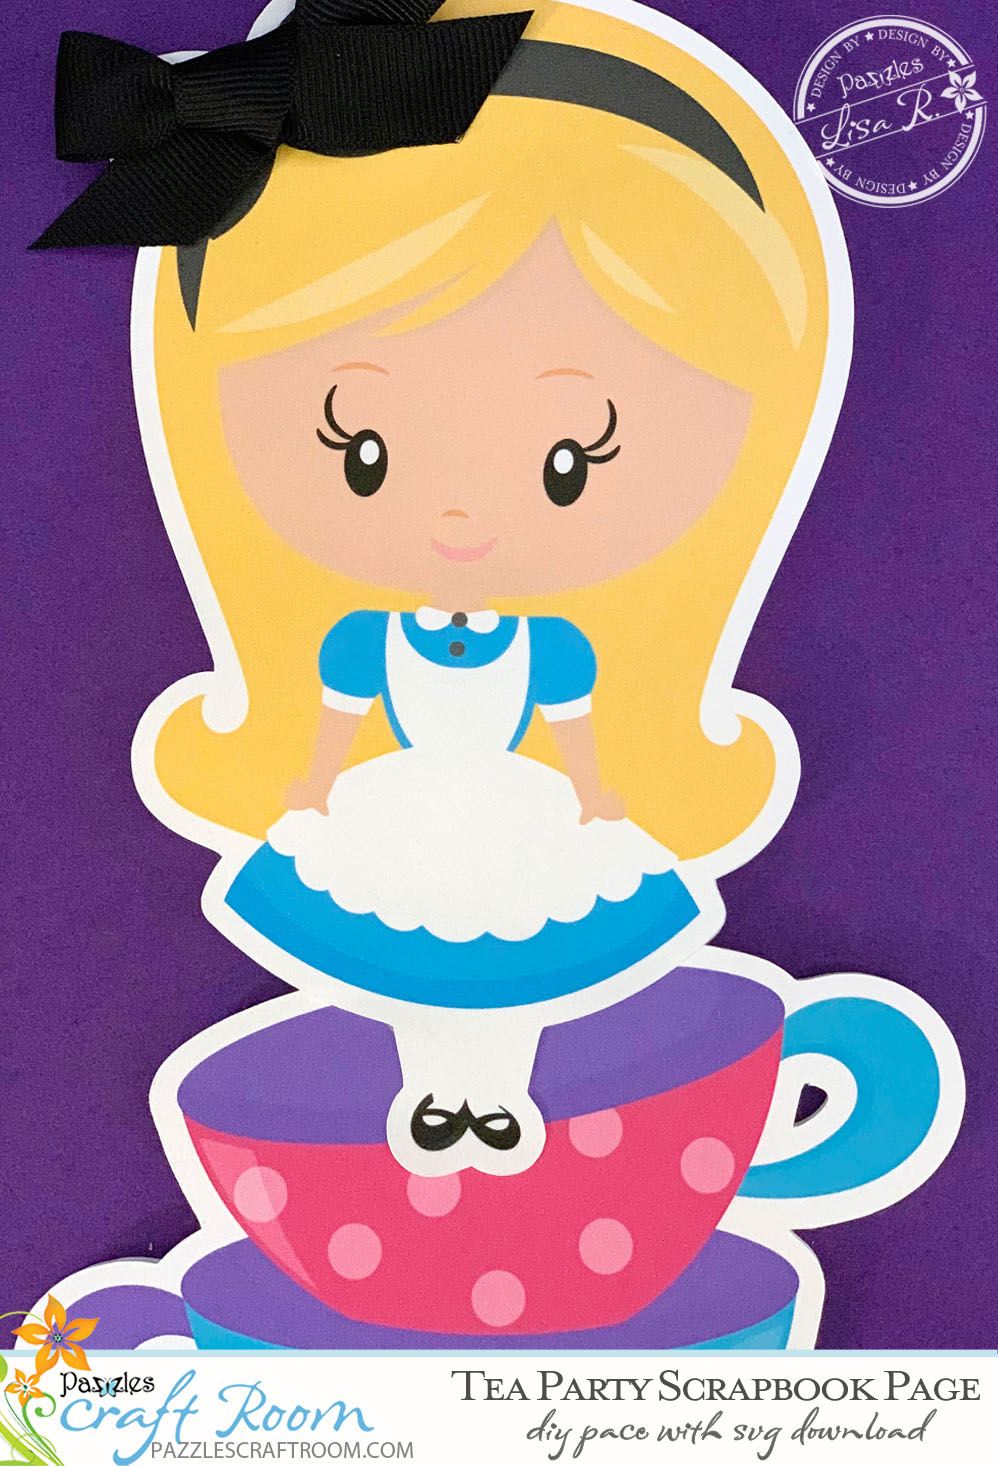 Pazzles DIY Alice in Wonderland Scrapbook Layout Tea Party with instant SVG download. Compatible with all major electronic cutters including Pazzles Inspiration, Cricut, and Silhouette Cameo. Design by Lisa Reyna.